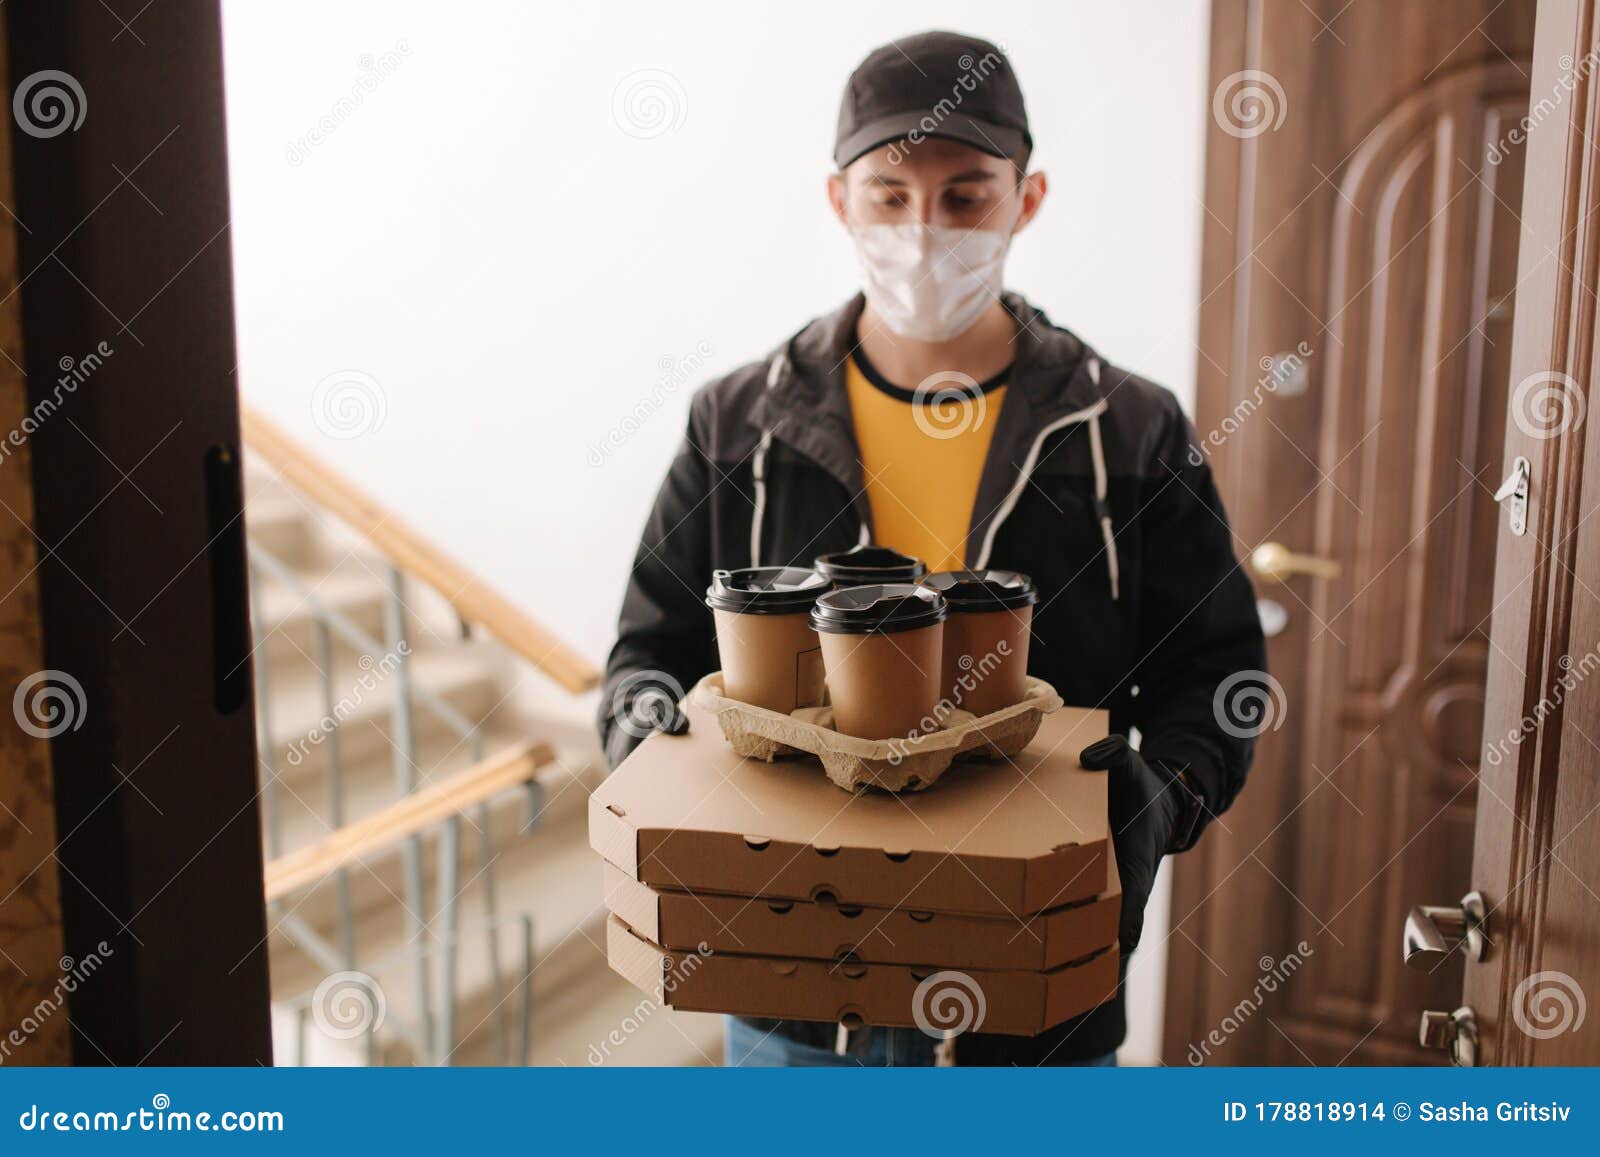 first persom view of delivery man in mask and gloves give pizza and coffe. stay home